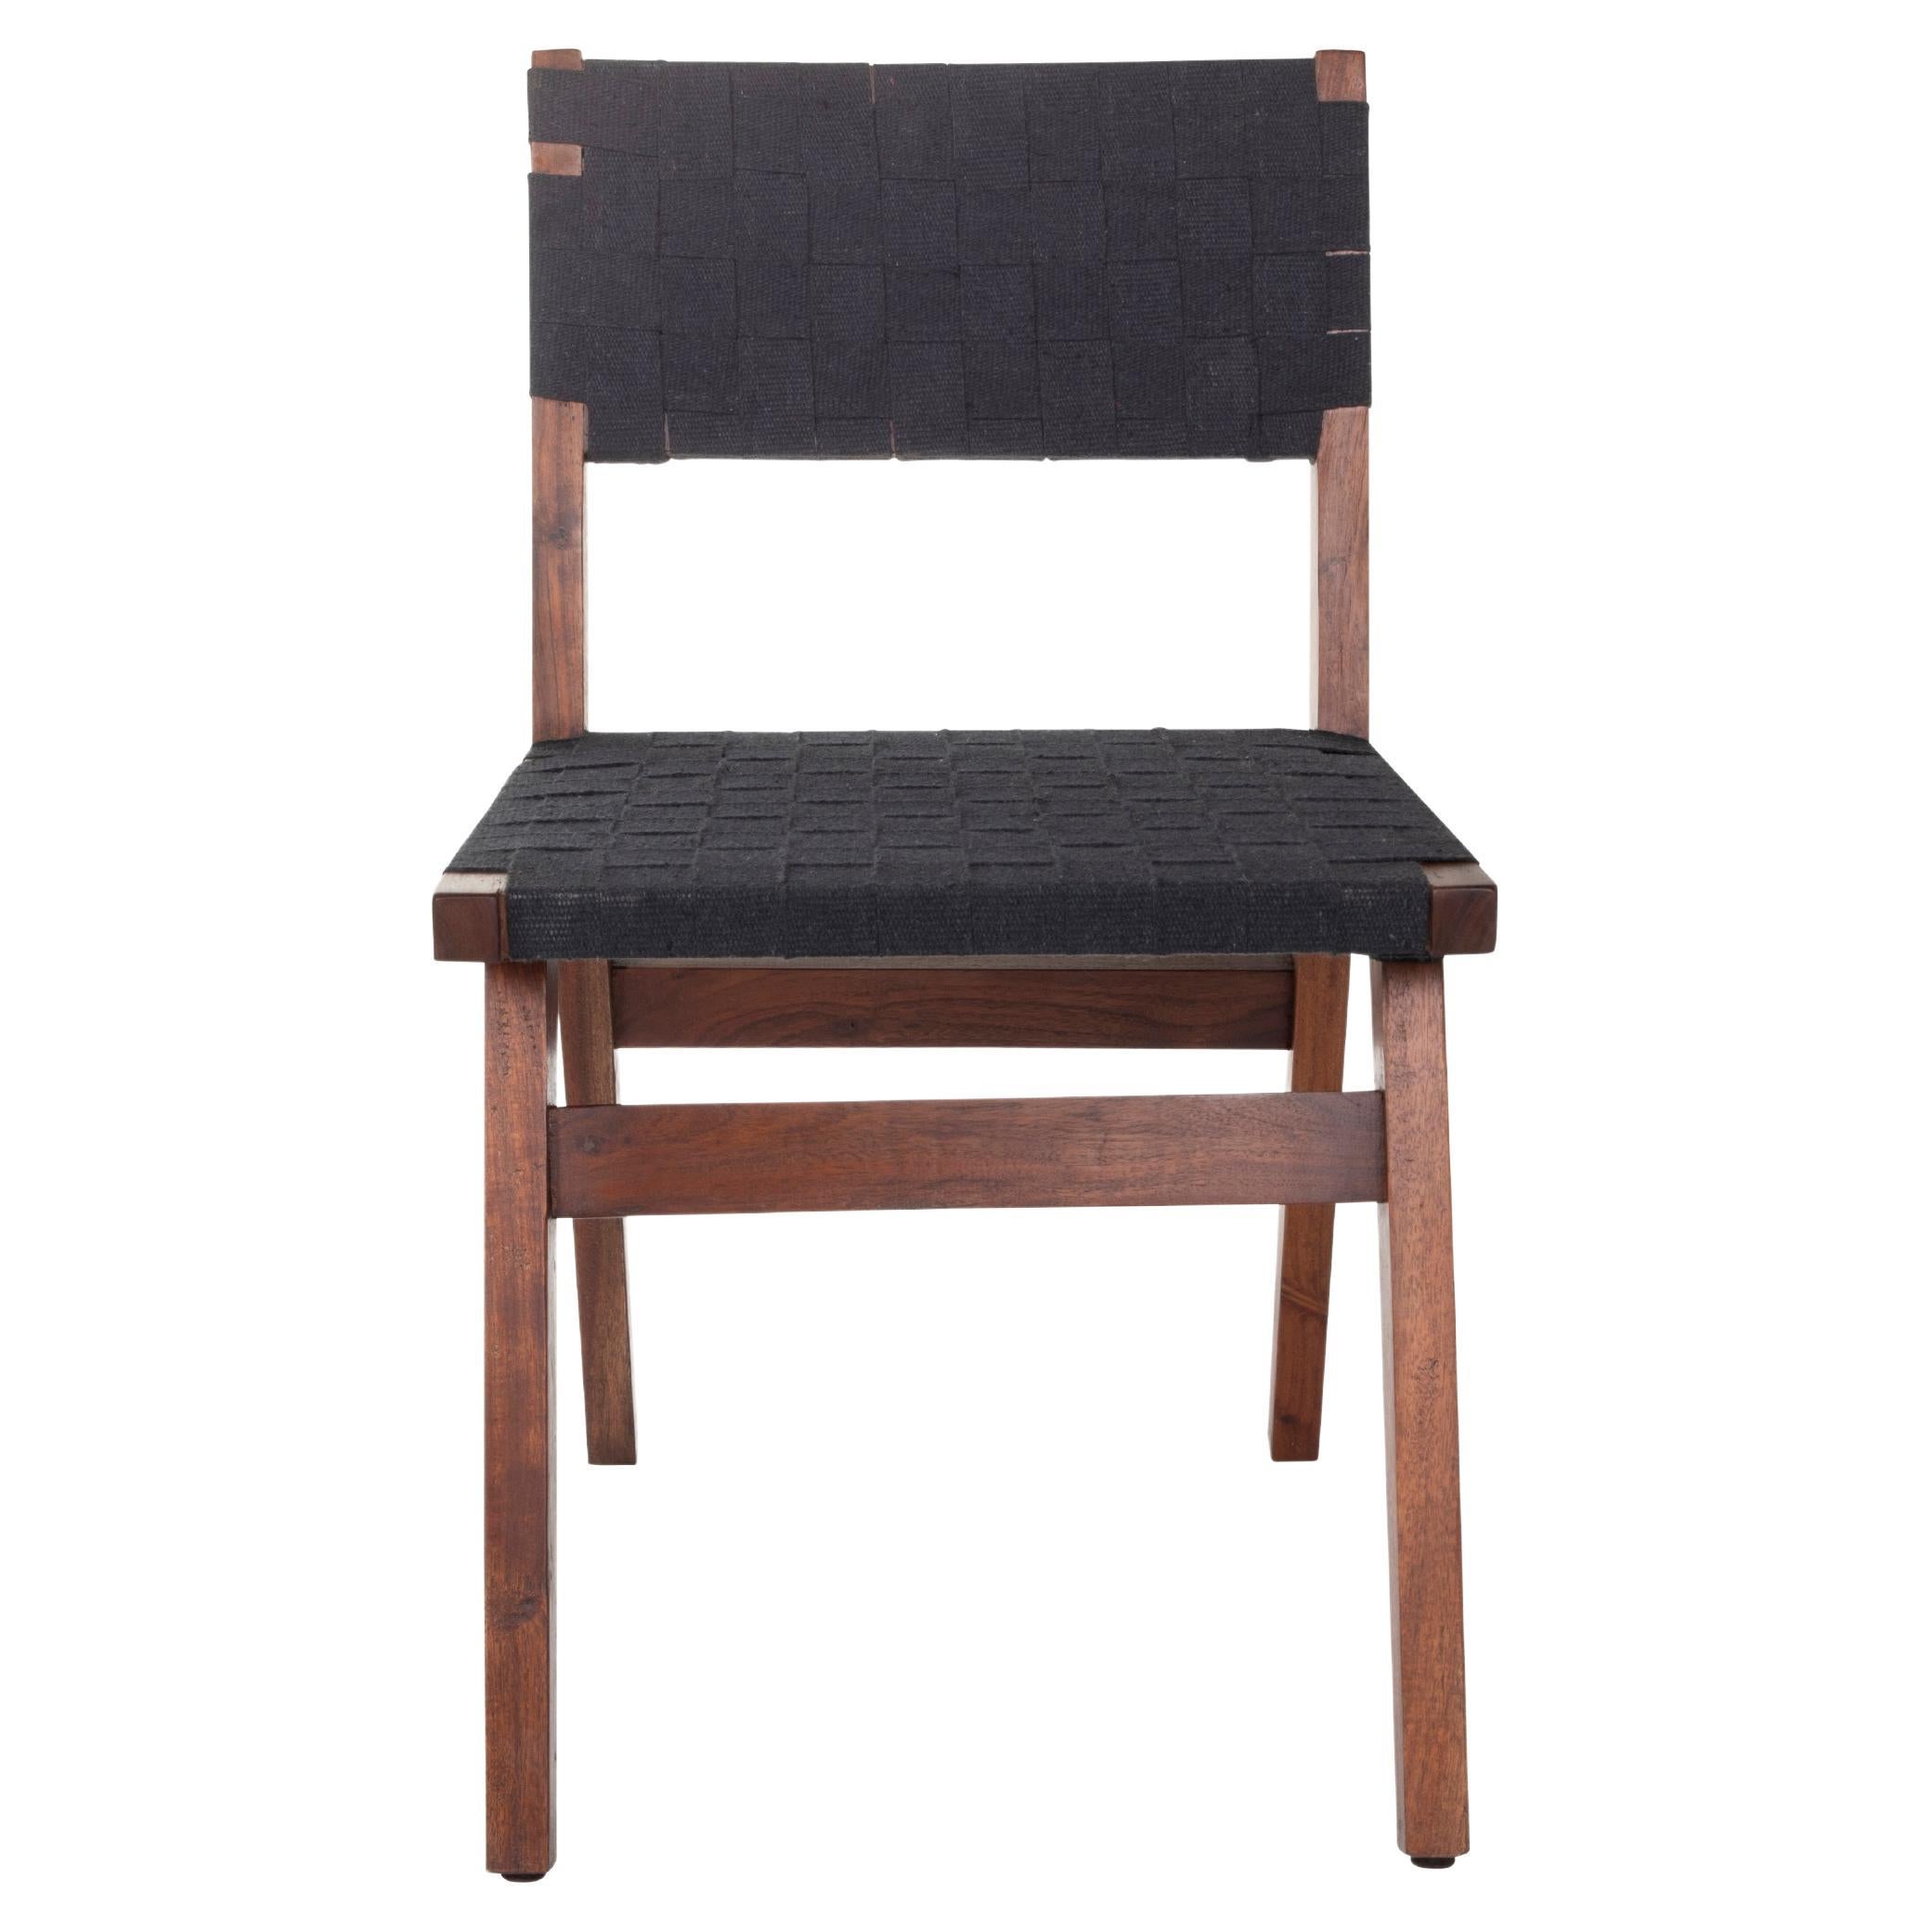 Set of Six Mid-Century Modern Style Canvas Strap Chairs